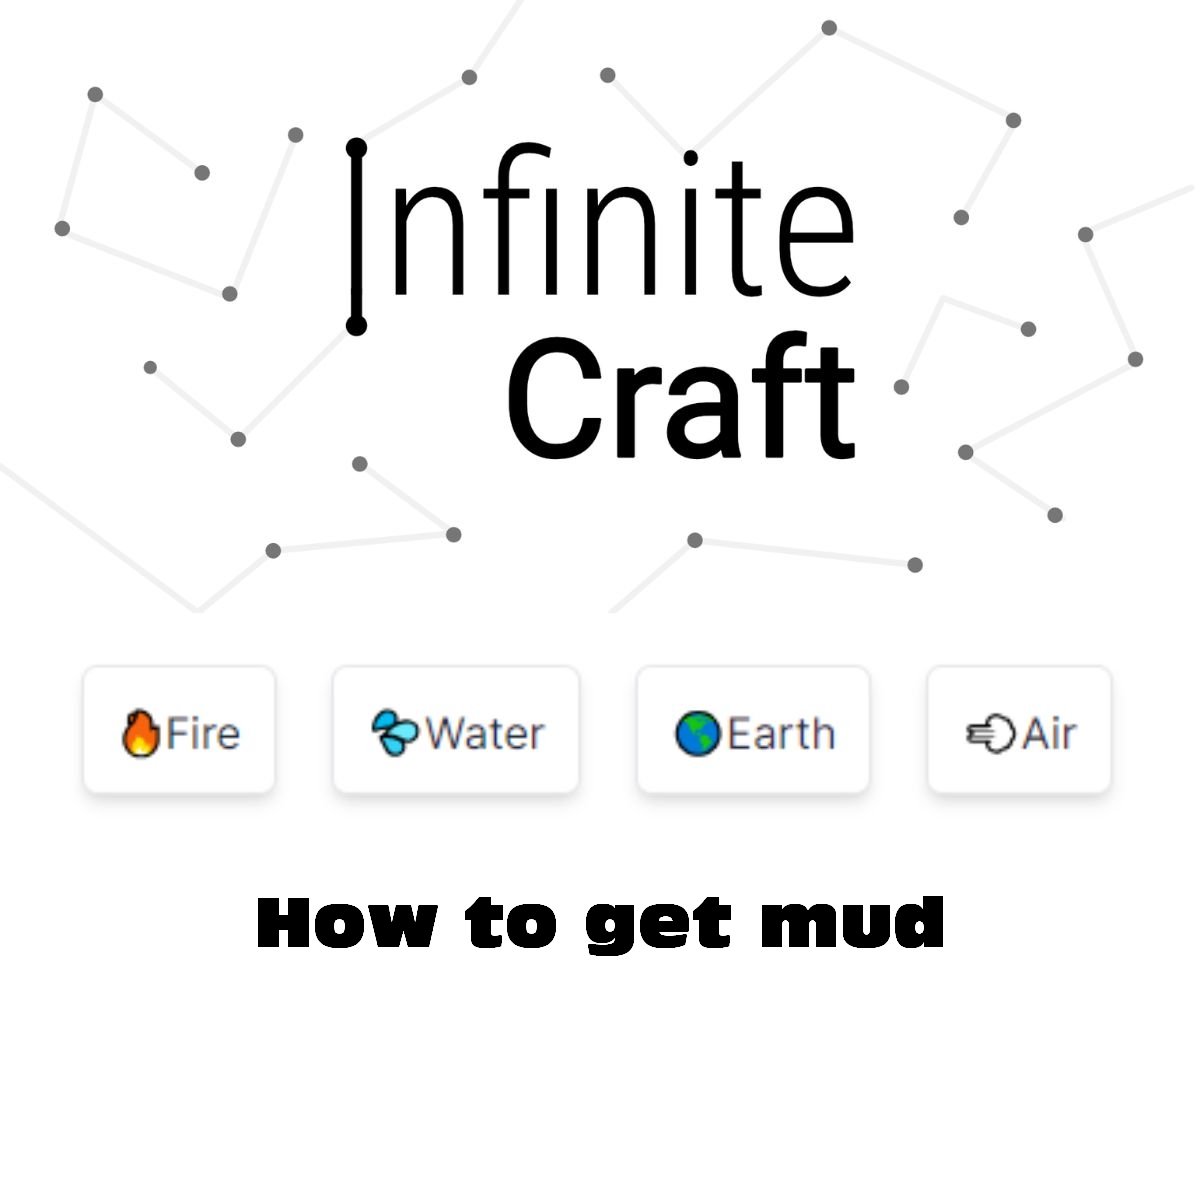 how to get mud in infinite craft